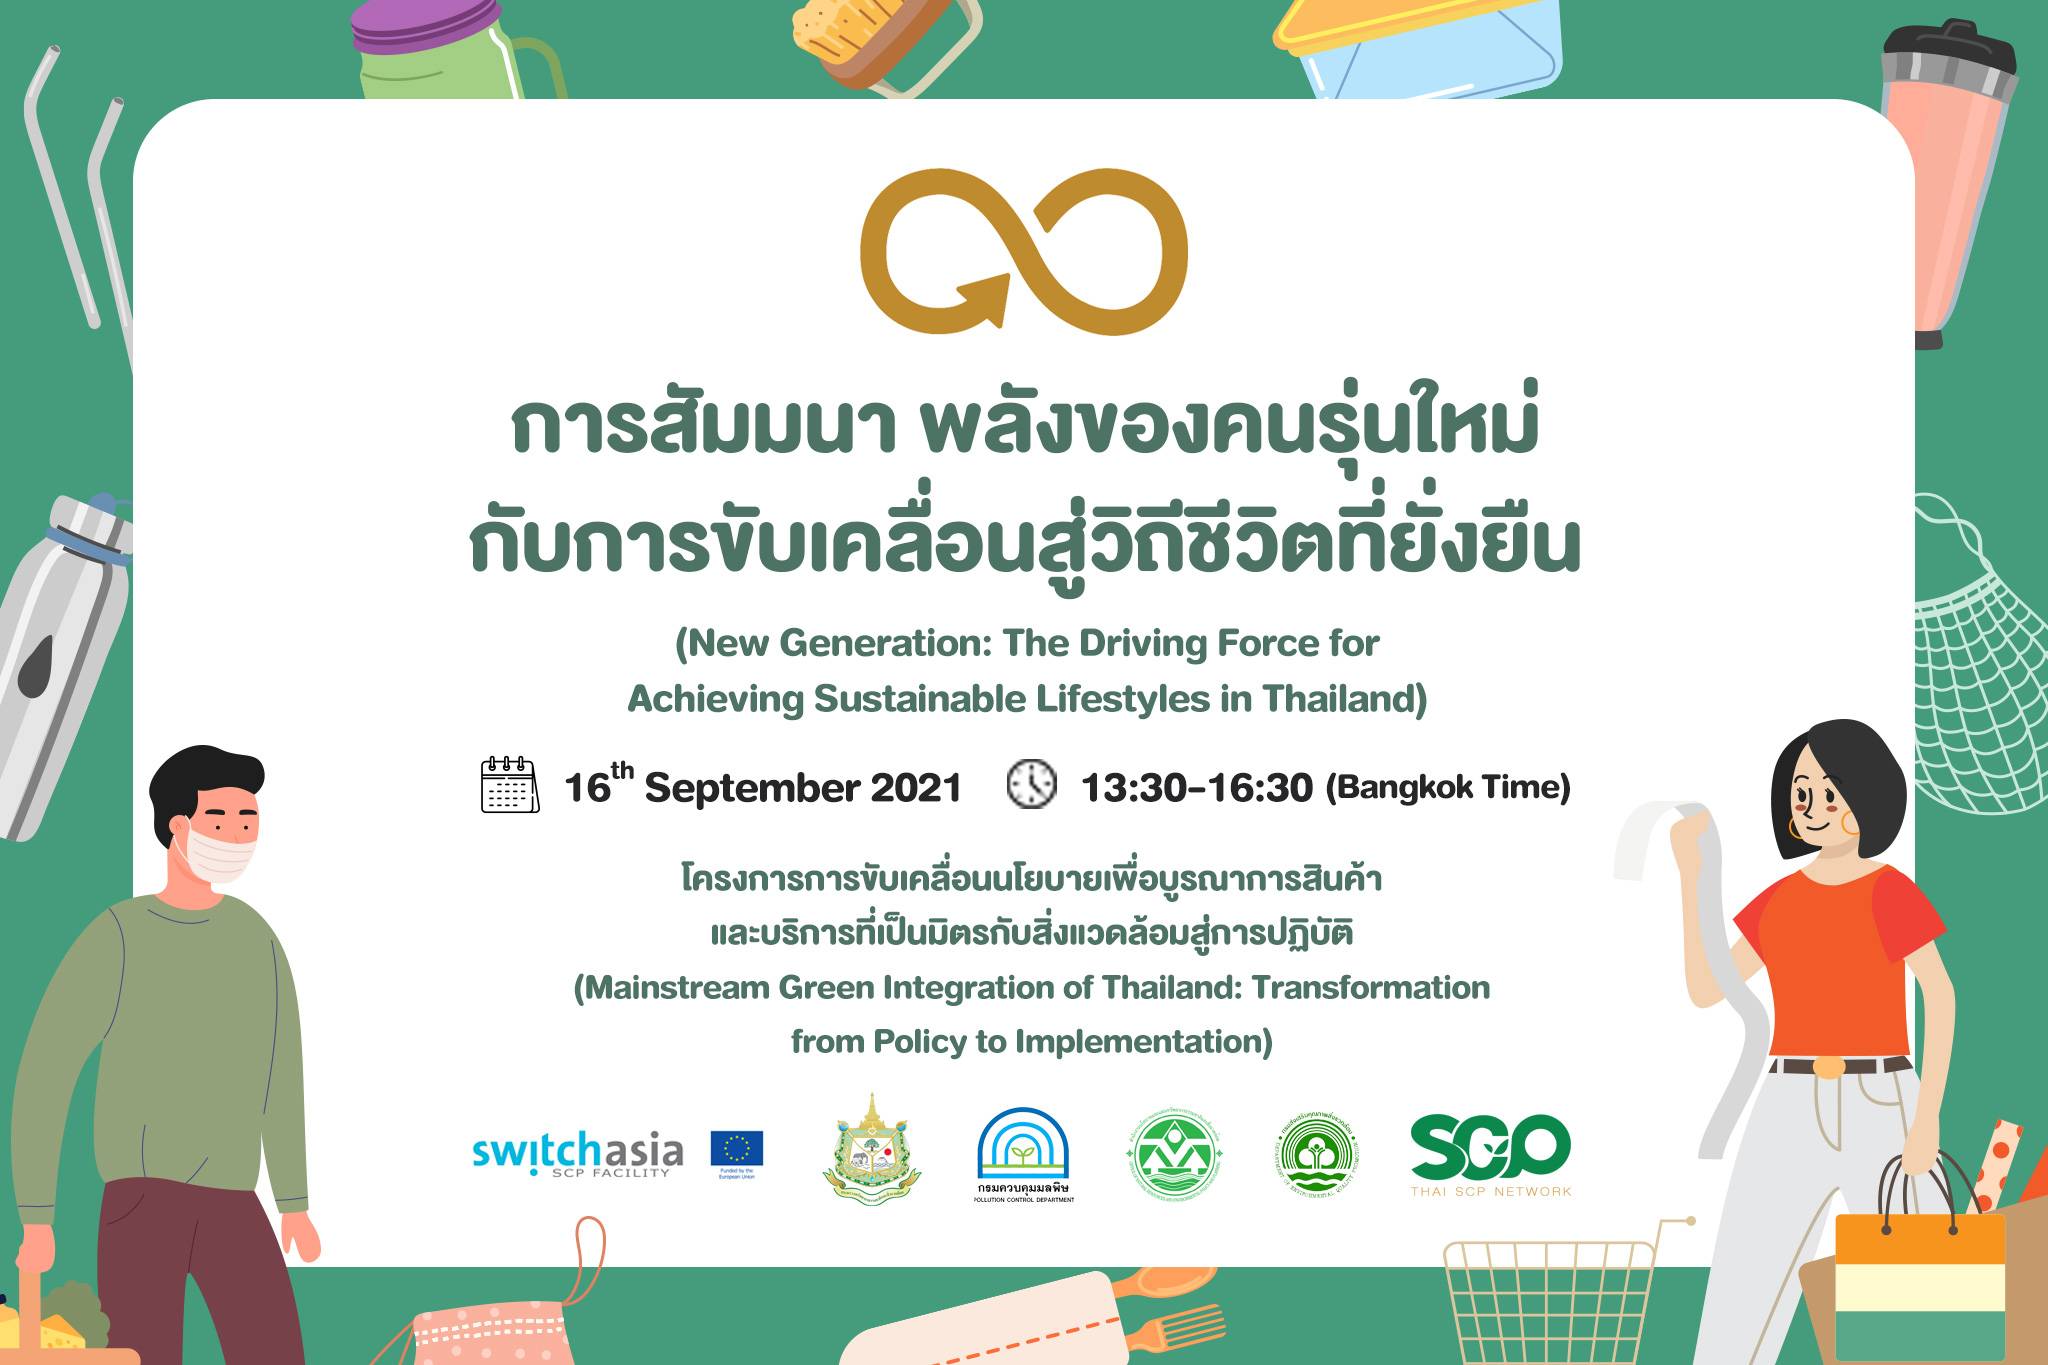 New Generations: The Driving Force for Achieving Sustainable Lifestyles in Thailand